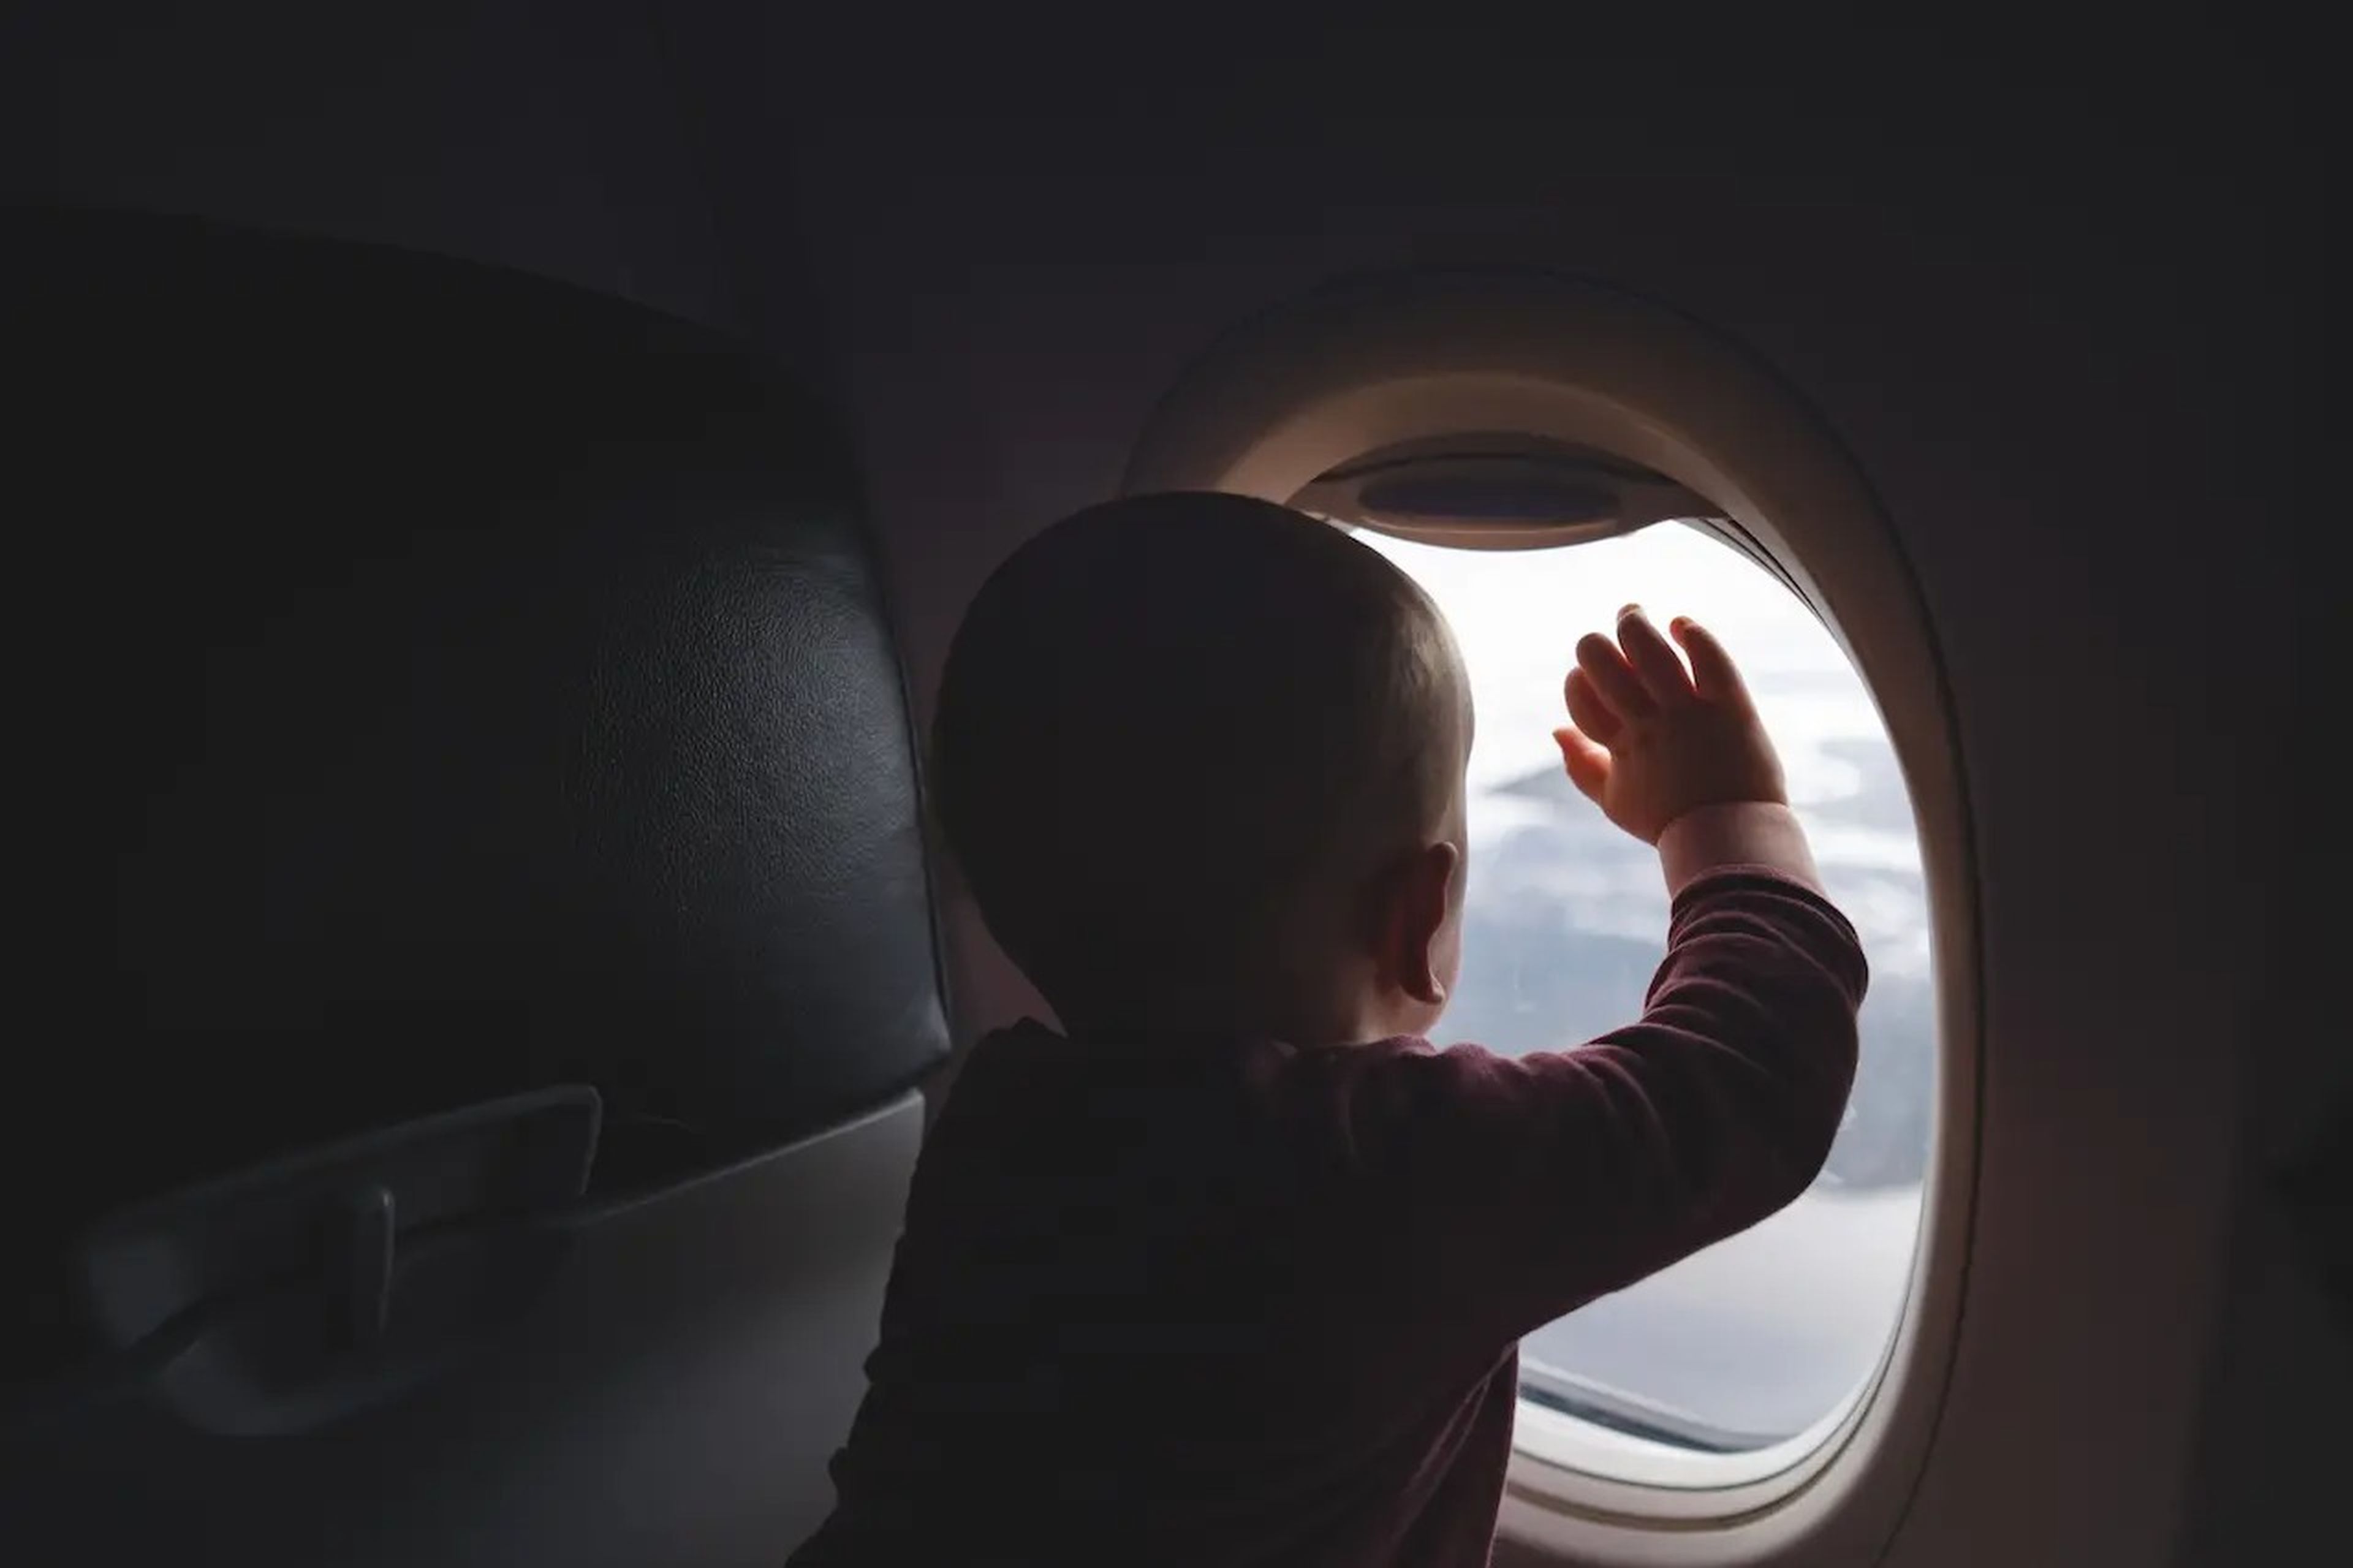 Flight attendants aren't bothered by babies in business class.